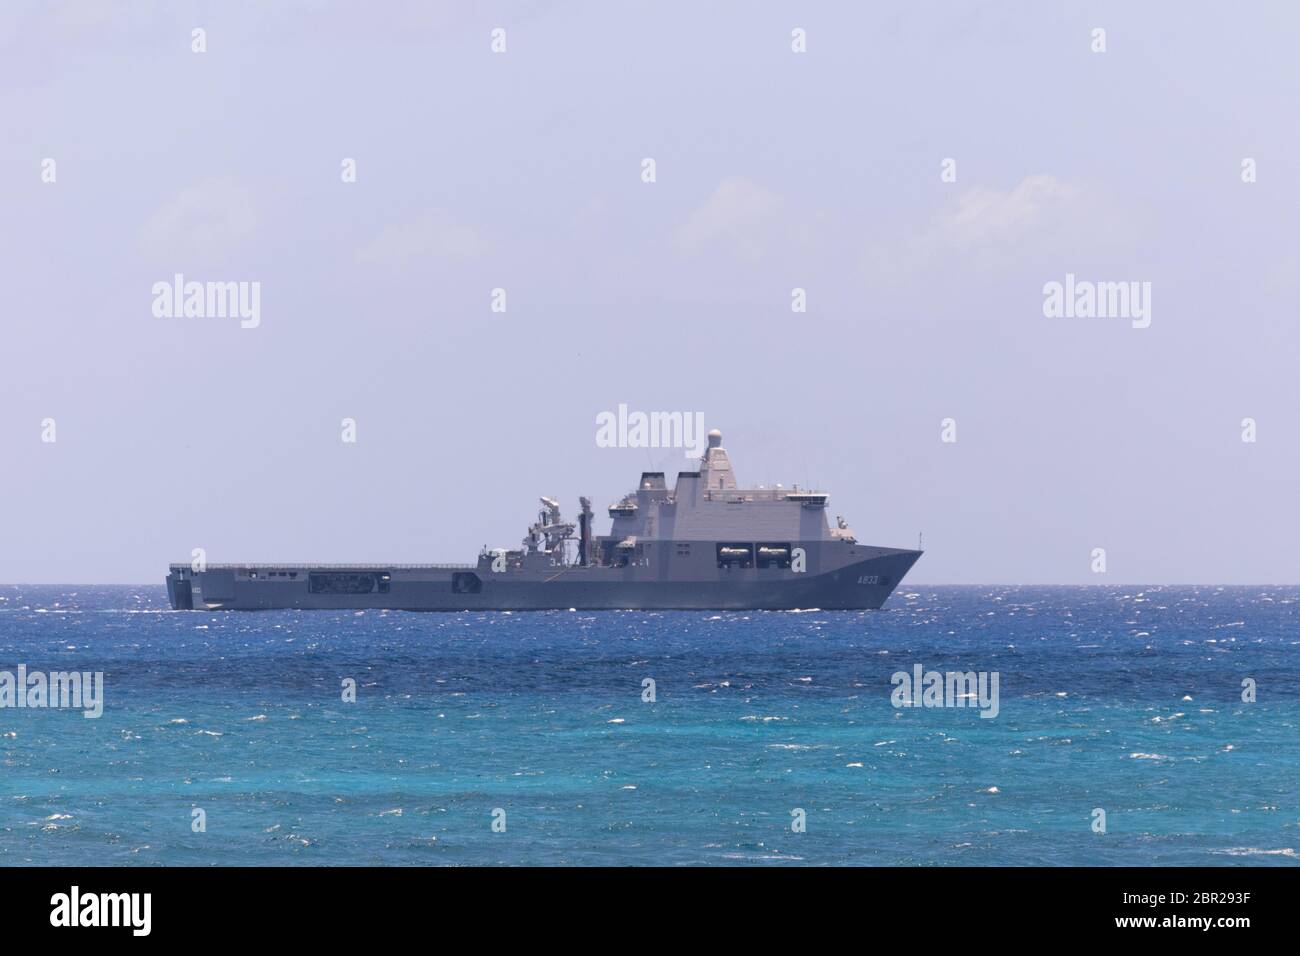 May 2020 - HNLMS Karel Doorman off the coast of Sint Maarten, Saba and St Eustasius in the Caribbean Sea to provide support to the islands Stock Photo